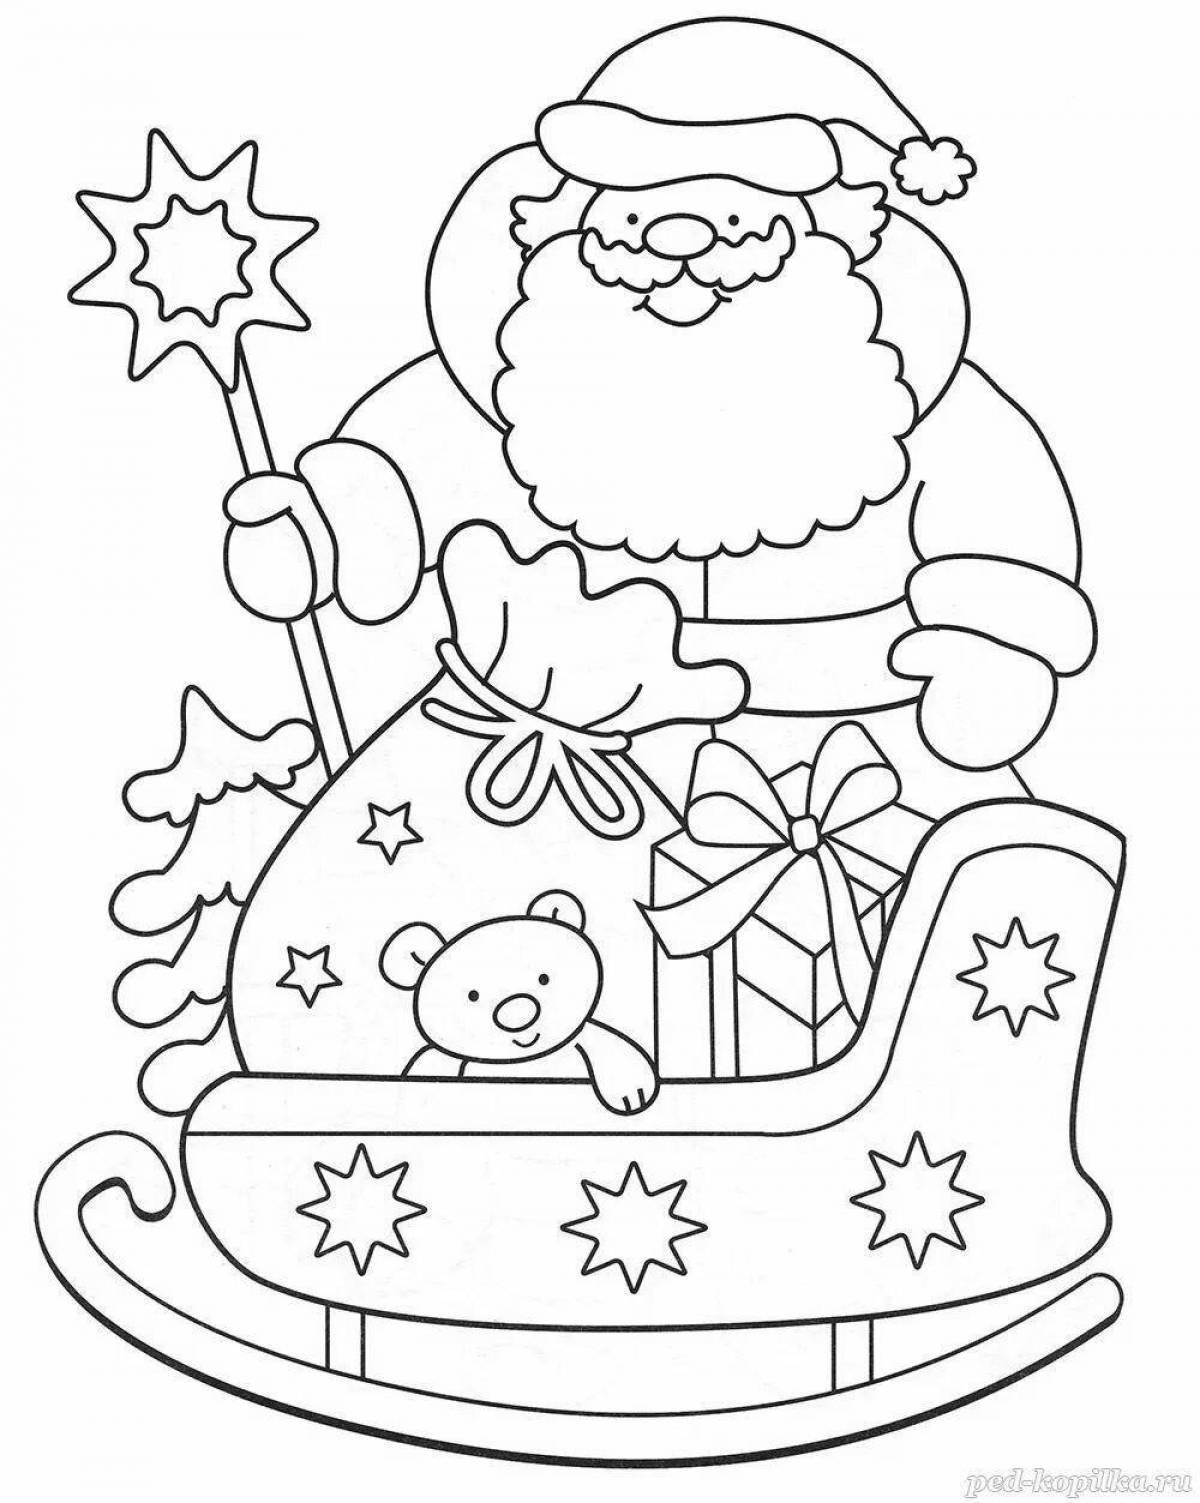 Magic Christmas coloring book for kids 3-4 years old